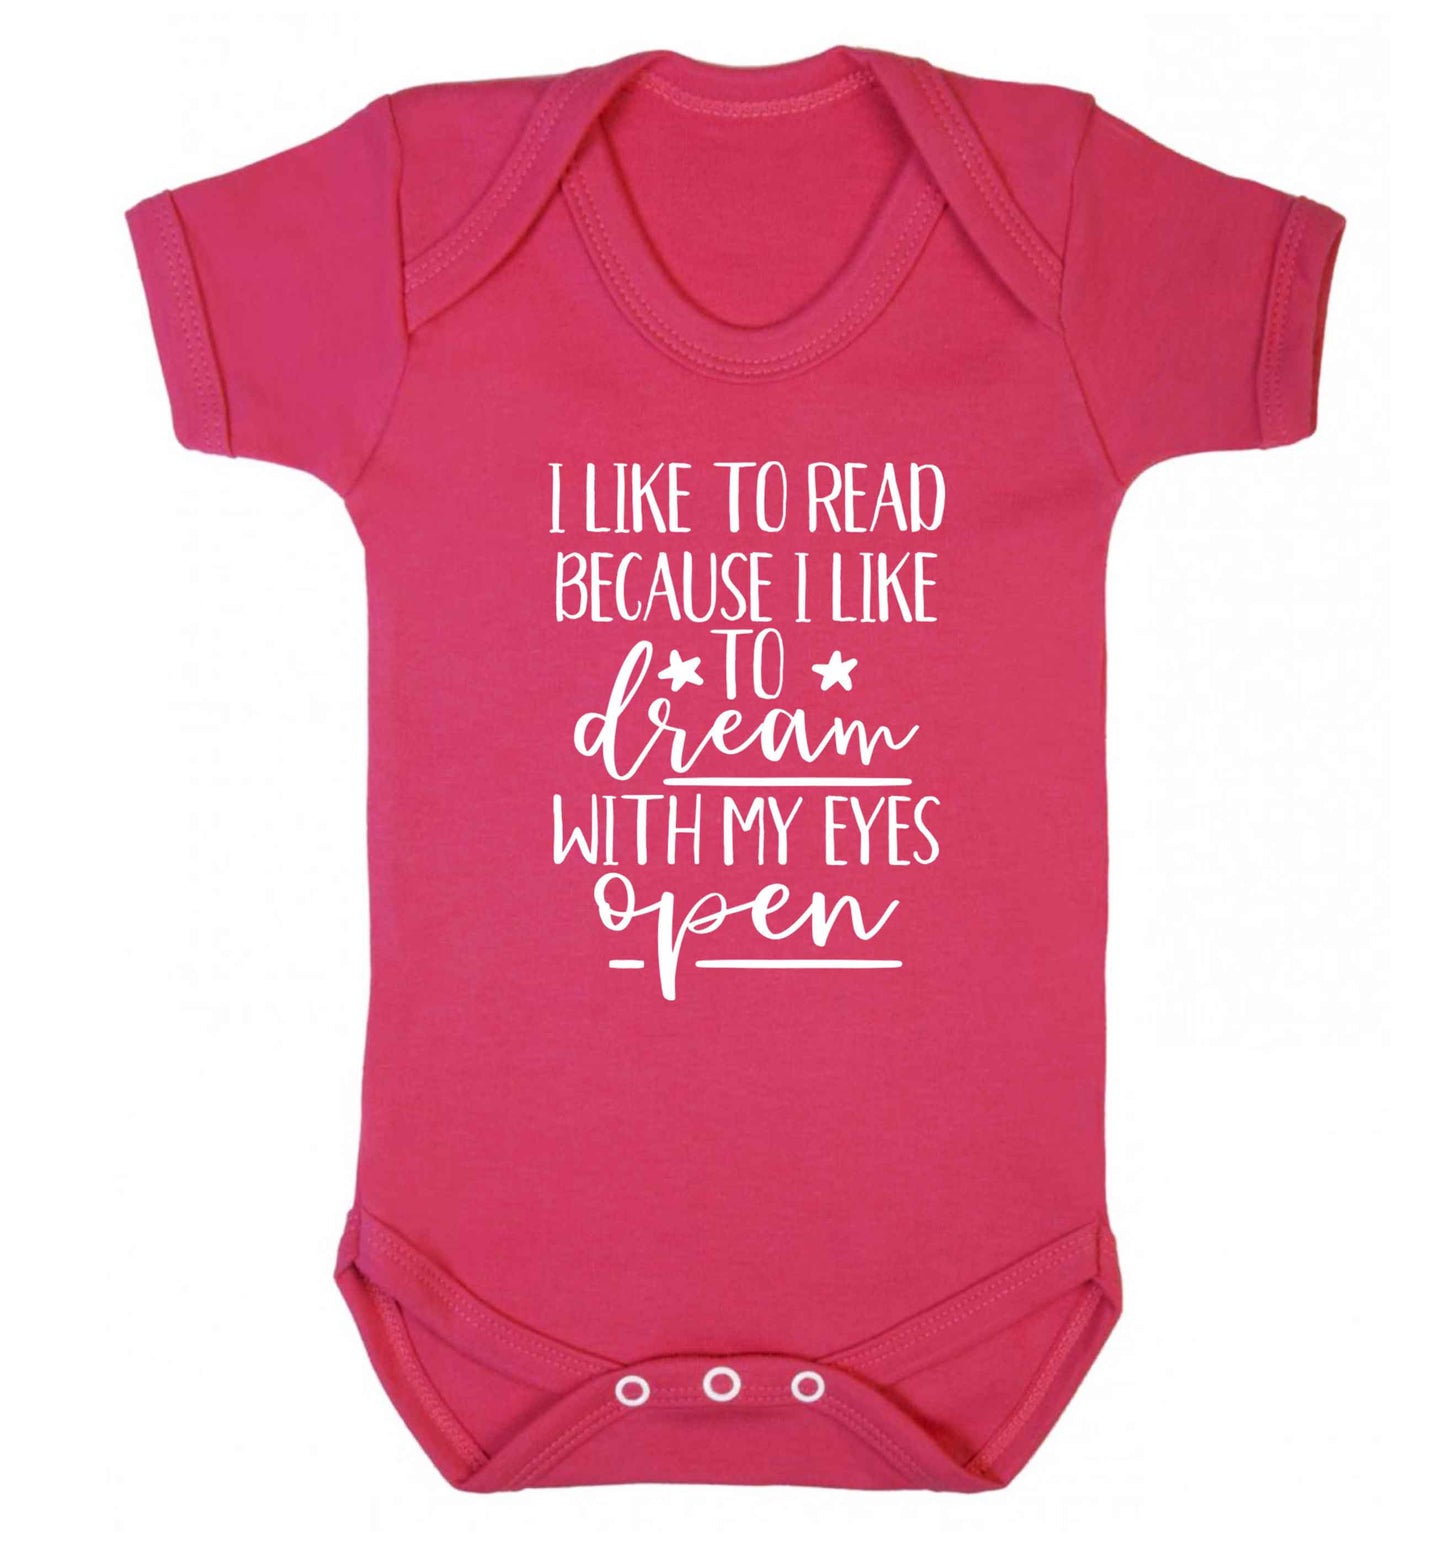 I like to read because I like to dream with my eyes open Baby Vest dark pink 18-24 months